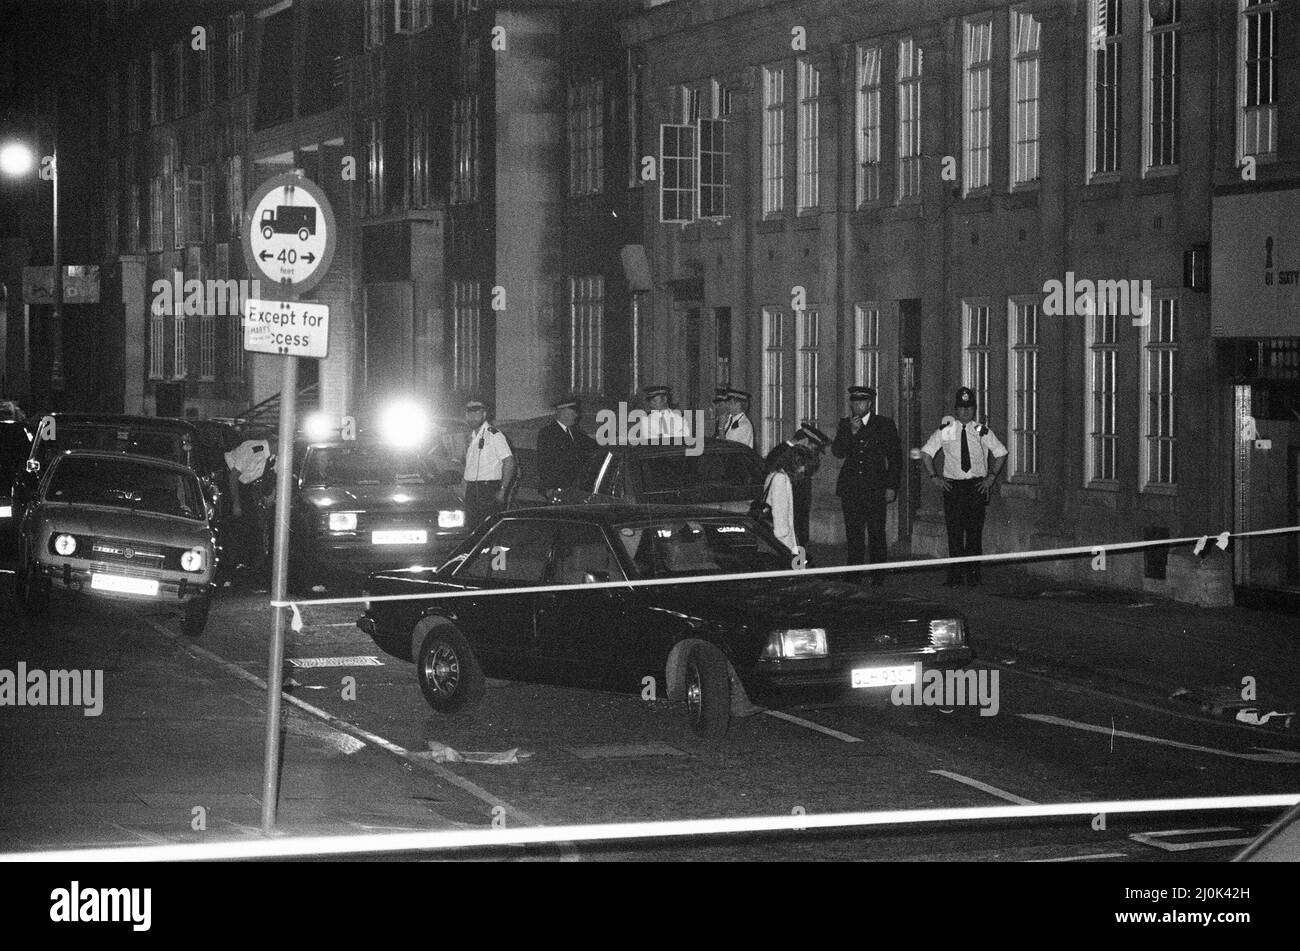 Crime Scene Attempted Assassination of Shlomo Argov, the Israeli ambassador to the United Kingdom, Thursday 3rd June 1982. Our picture shows ... crime scene where Shlomo Argov was shot in the head  as he got into his car after a banquet at the Dorchester Hotel, in Park Lane, London.   Argov was not killed, but he was critically injured.  The attempt on Argov's life was used by Israel as grounds for the 1982 Lebanon War. Stock Photo